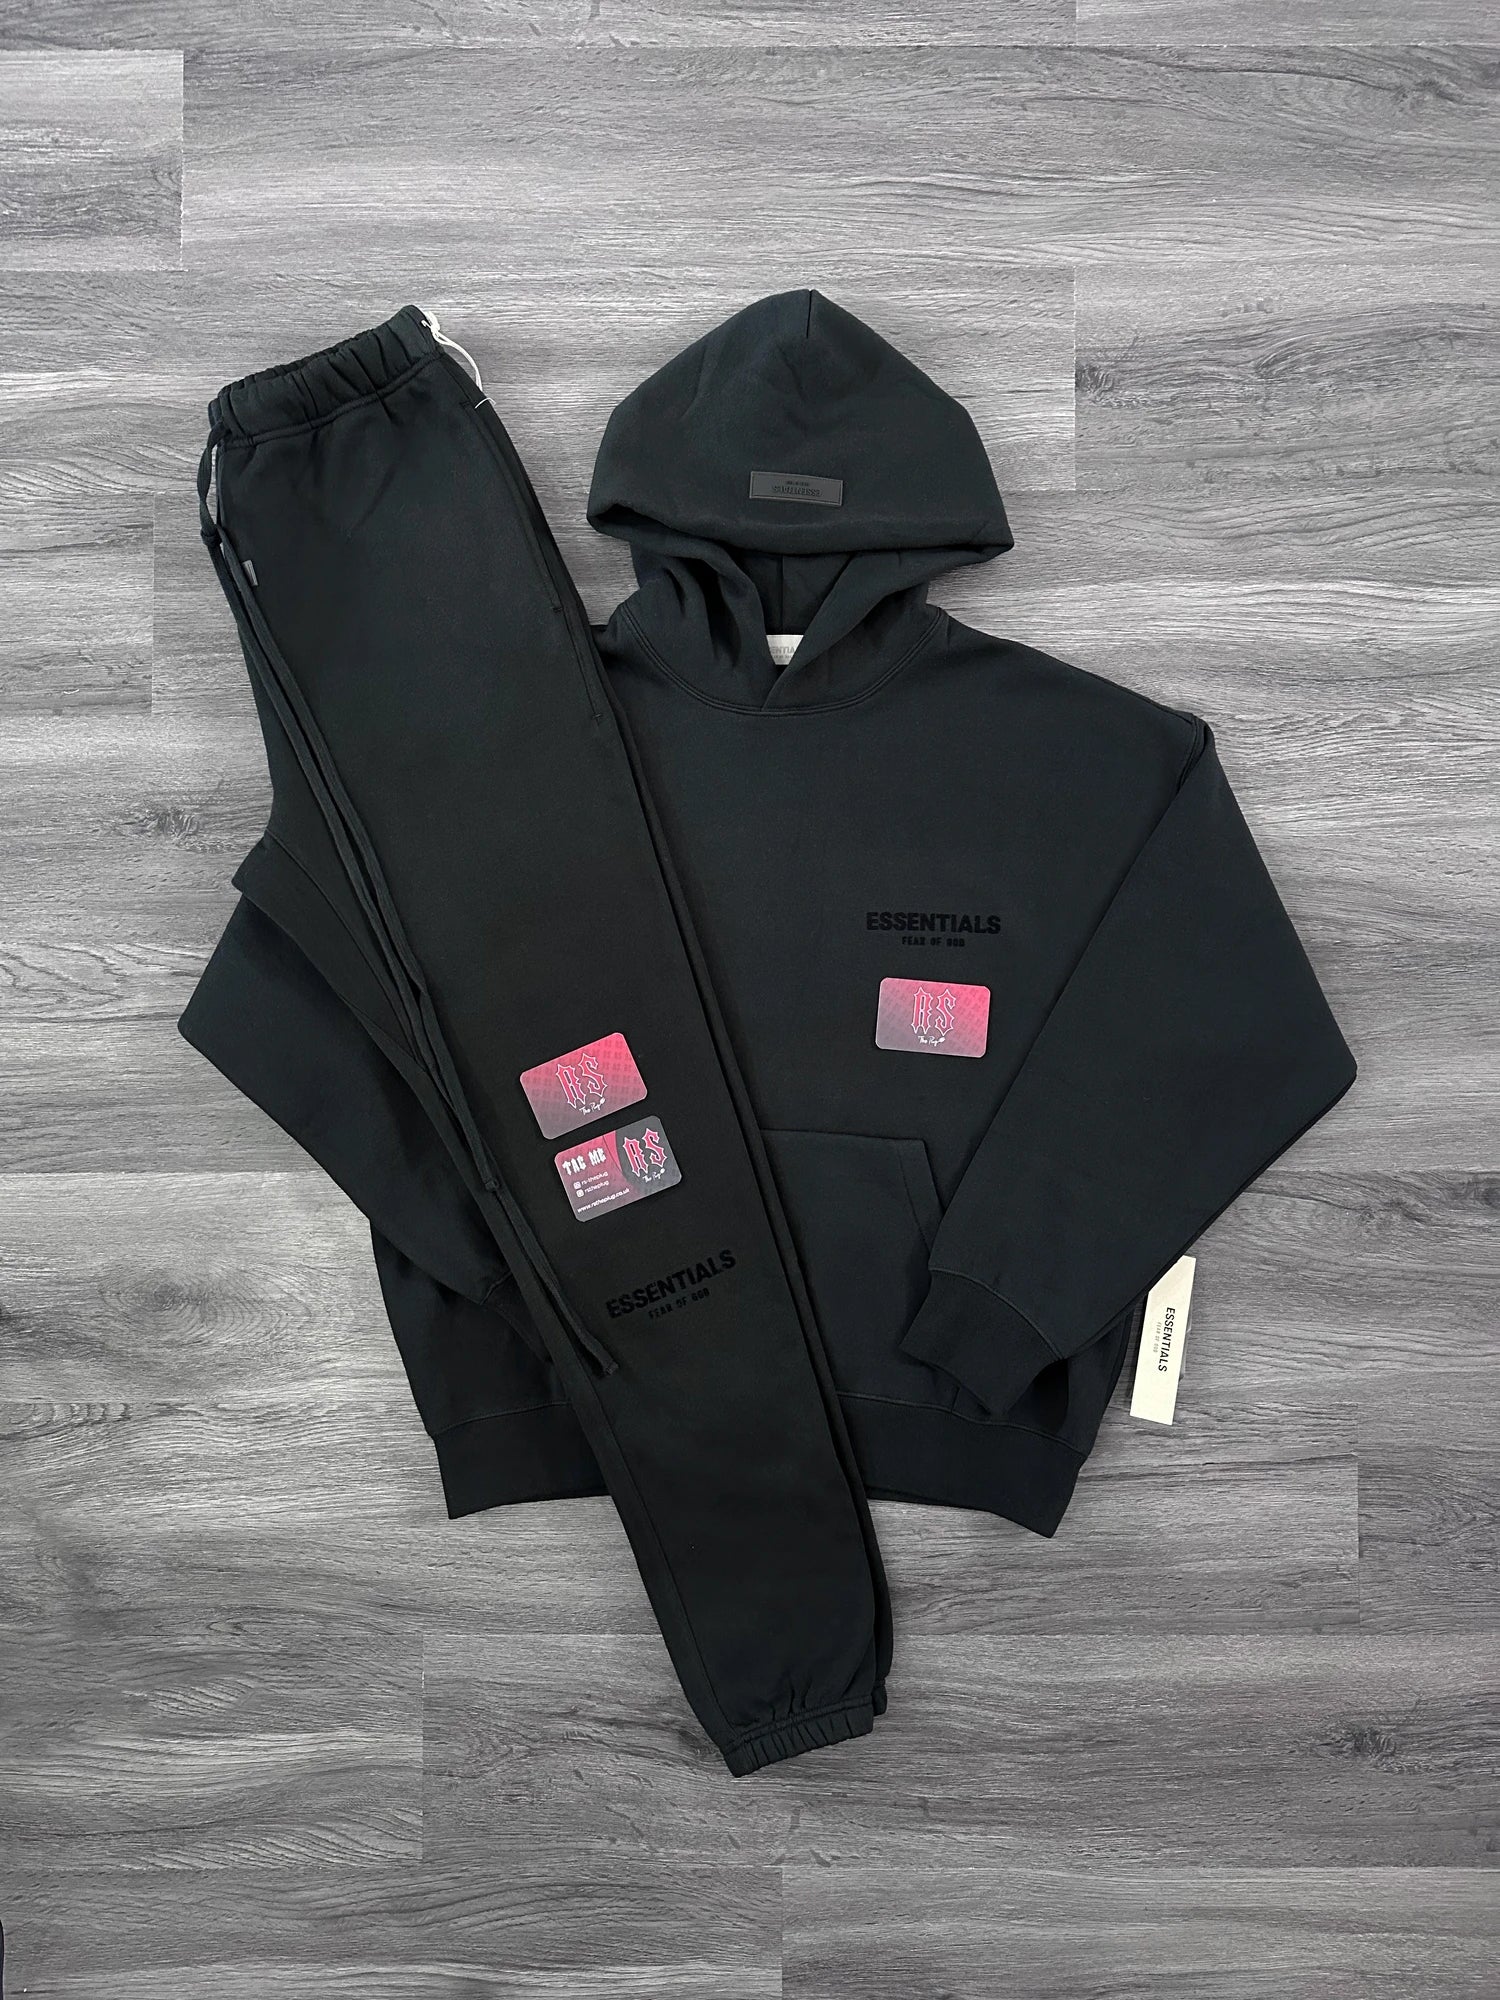 Fear Of God Essentials Tracksuit S22 Limo Black